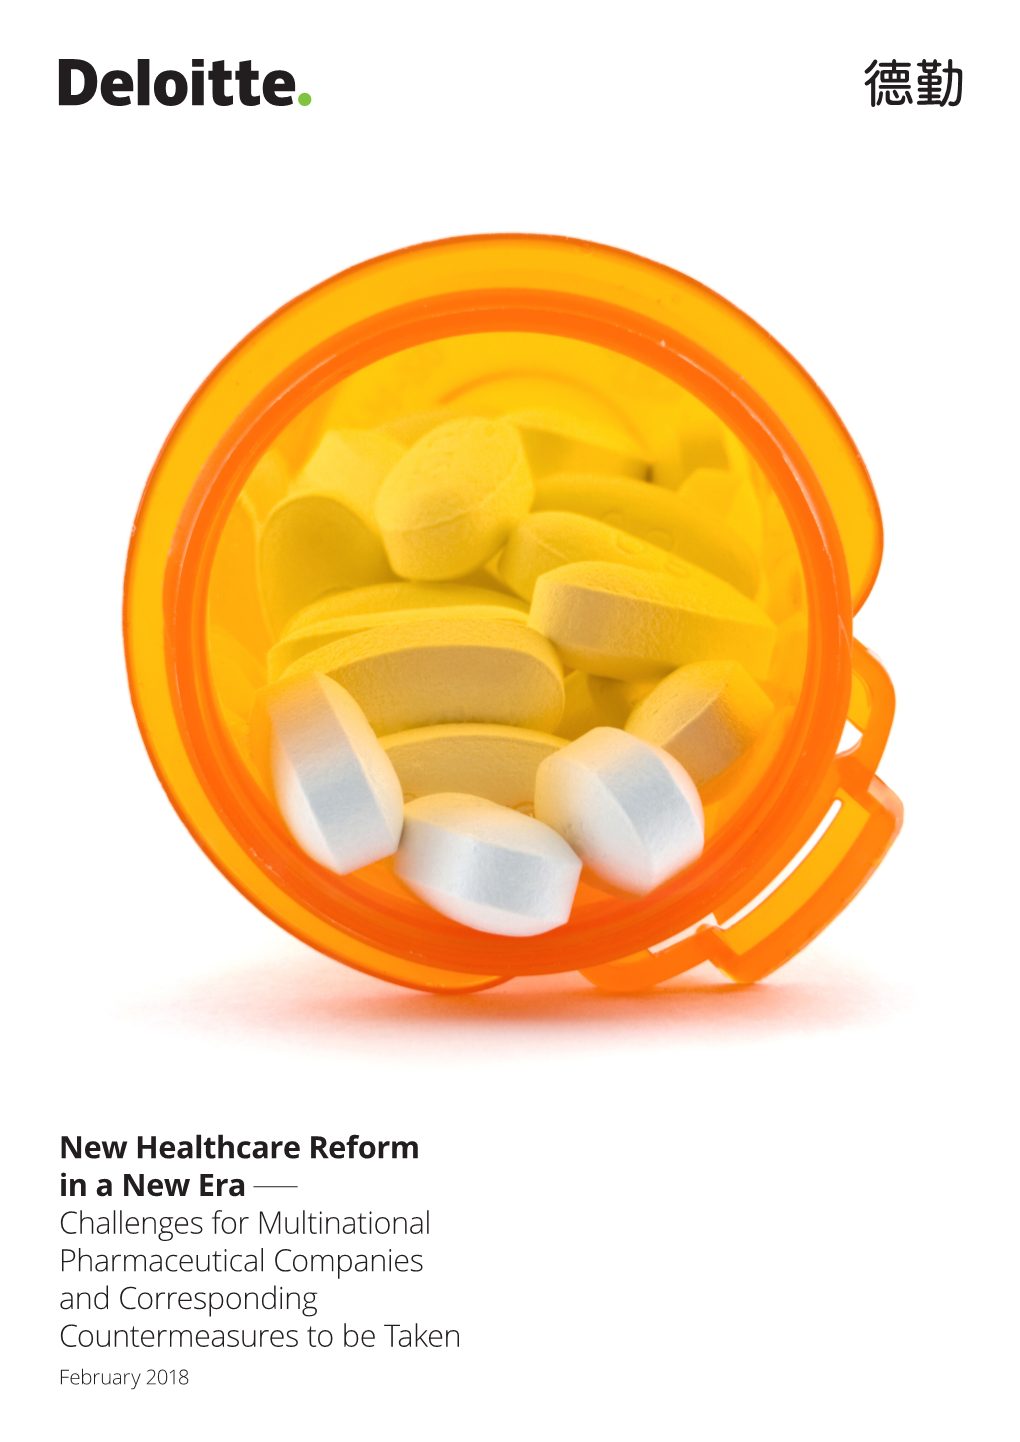 New Healthcare Reform in a New Era Challenges for Multinational Pharmaceutical Companies and Corresponding Countermeasures to Be Taken February 2018